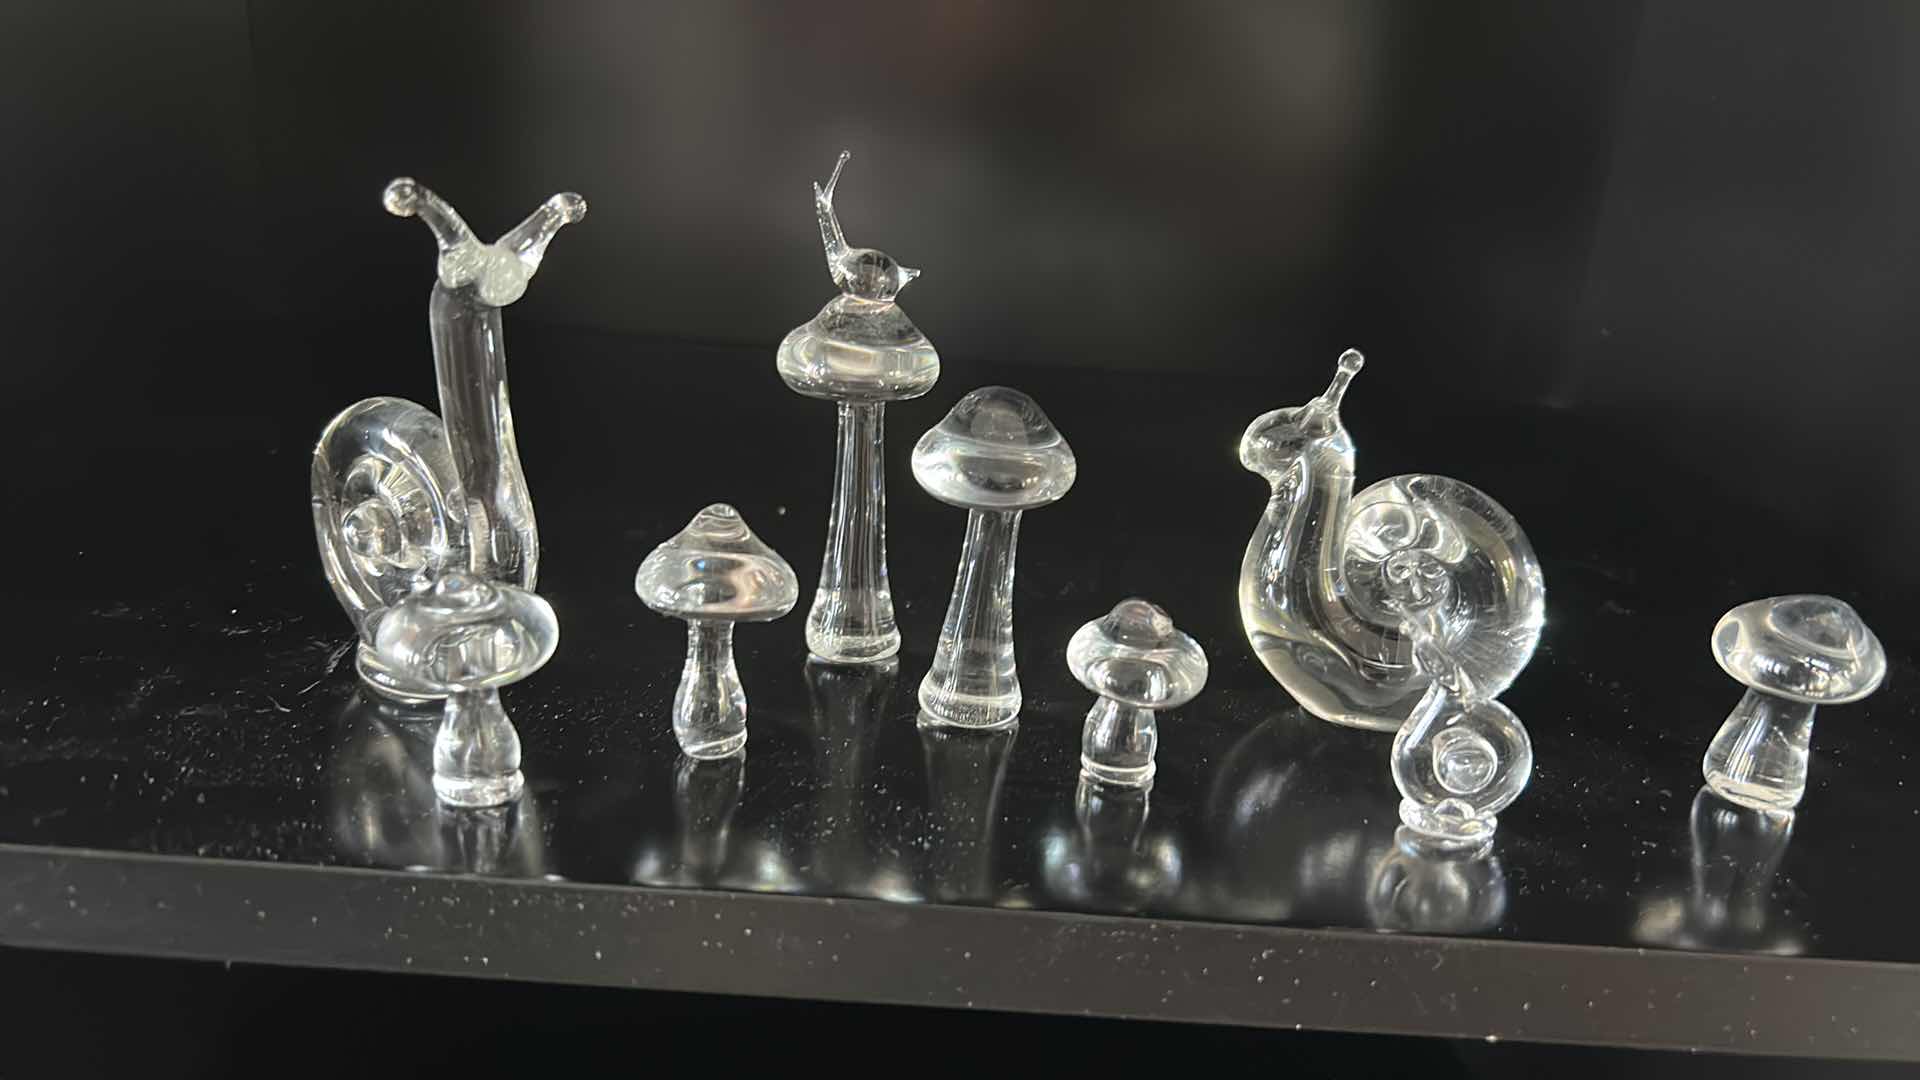 Photo 7 of HAND BLOWN GLASS FIGURINES SNAILS AND MUSHROOMS TALLEST 3.5”